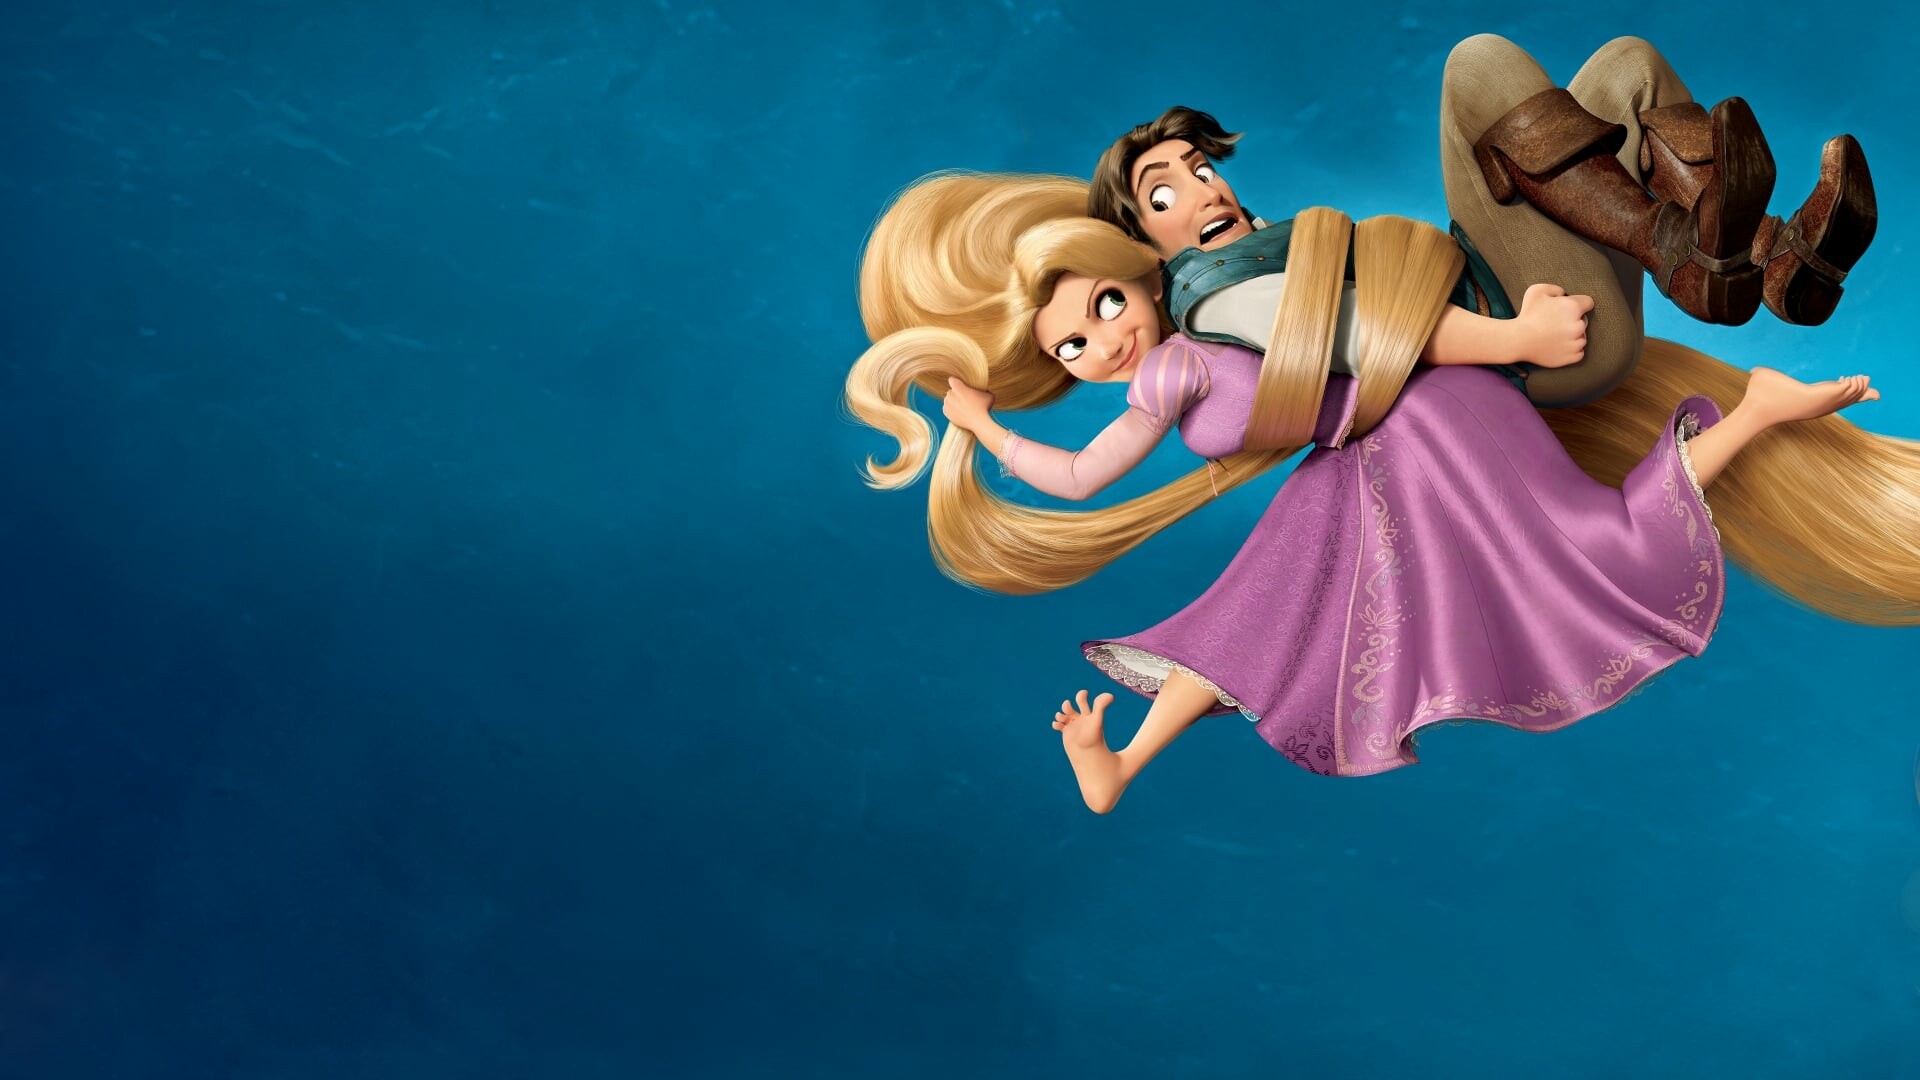 Tangled: Rapunzel, The protagonist of Disney's 2010 animated feature film. 1920x1080 Full HD Background.